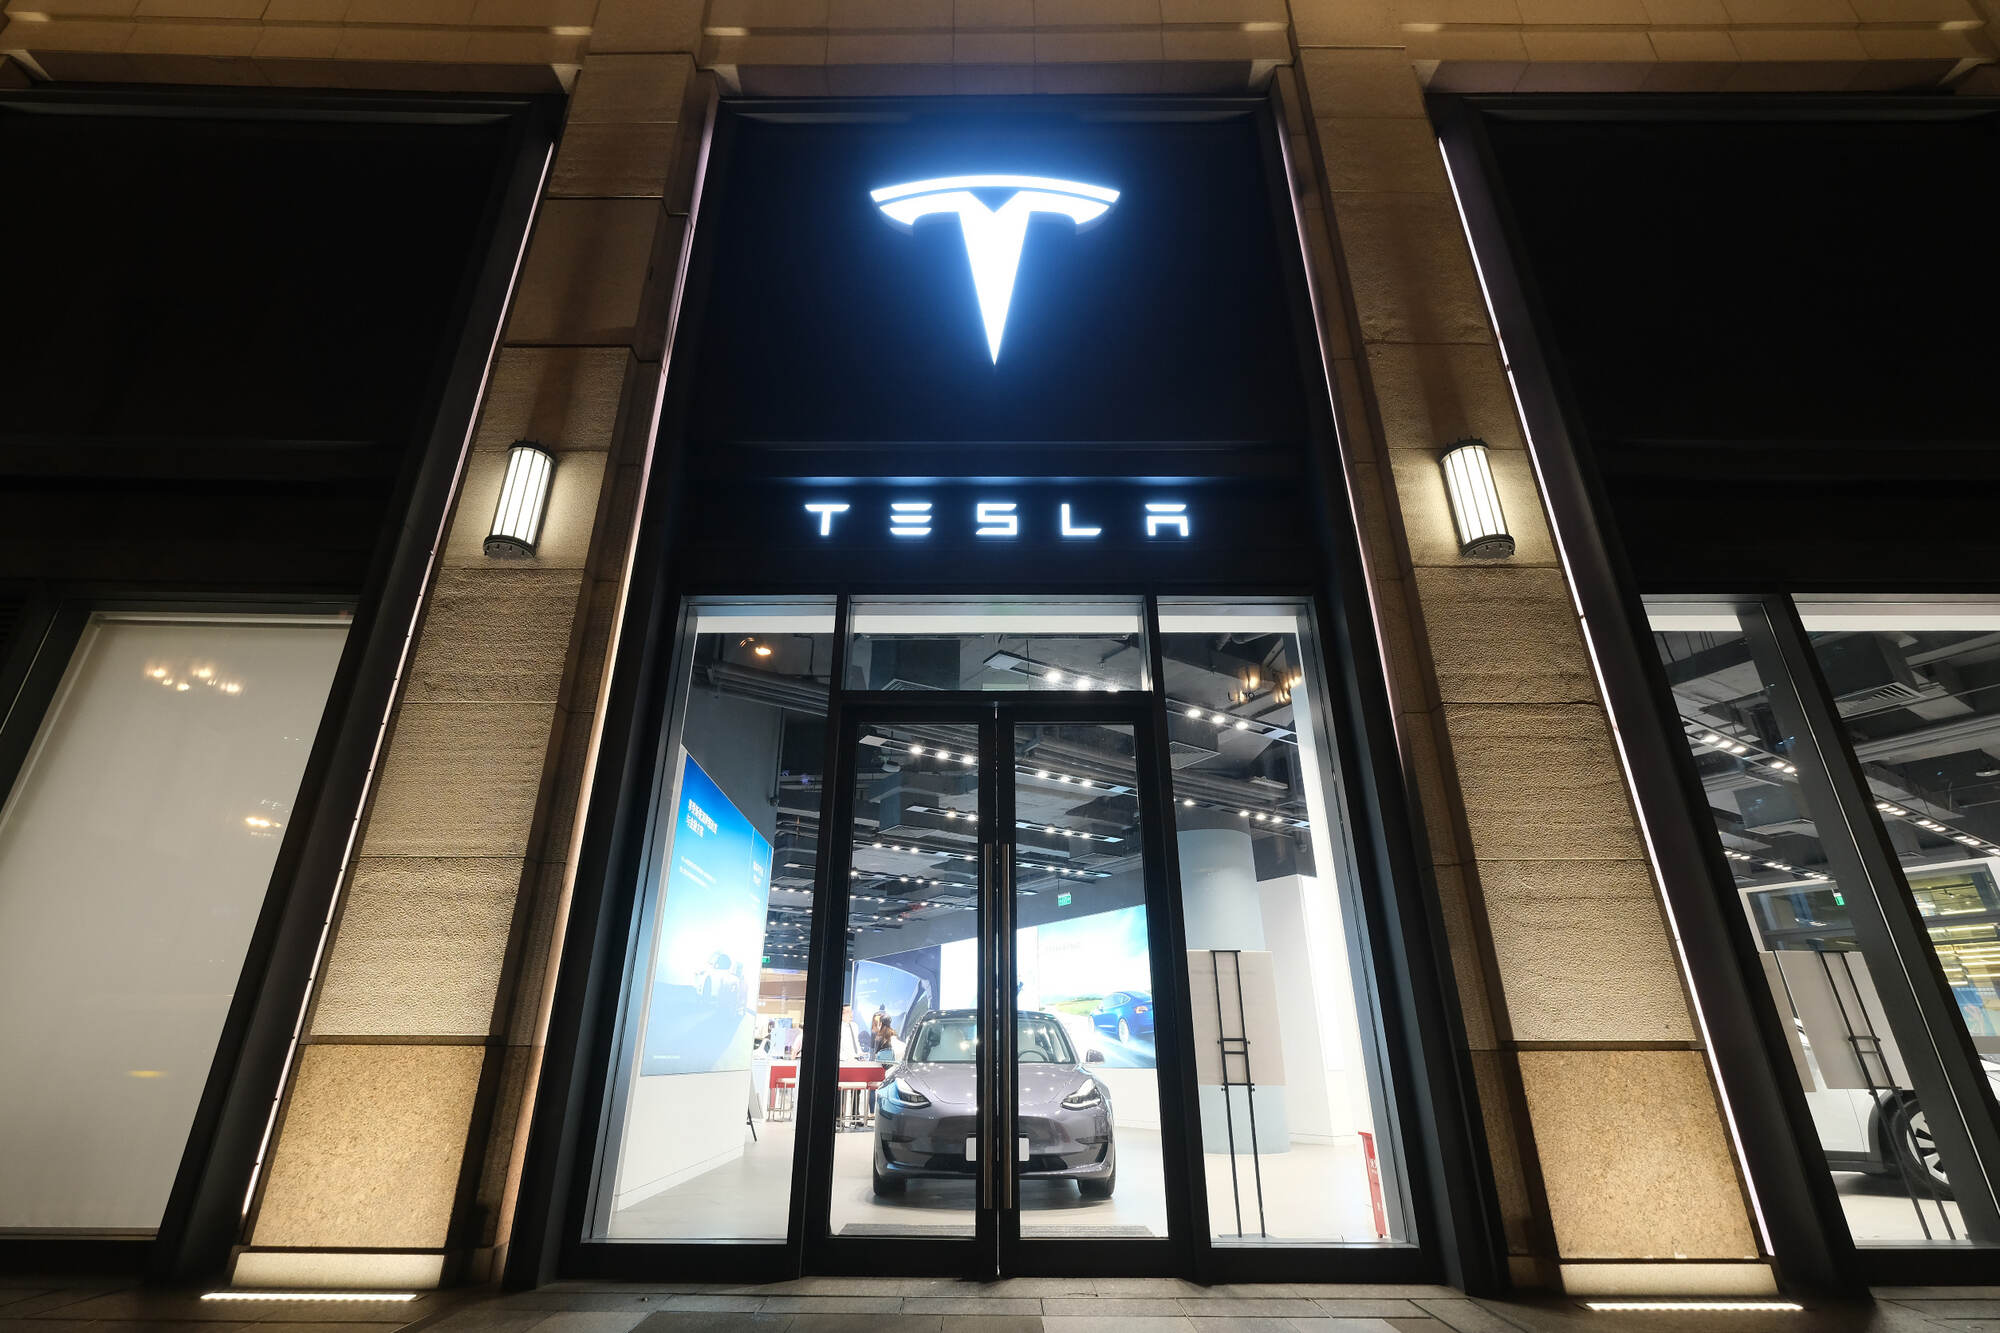 Tesla owner forced to apologize following protest over brake failure· TechNode #chicomnews